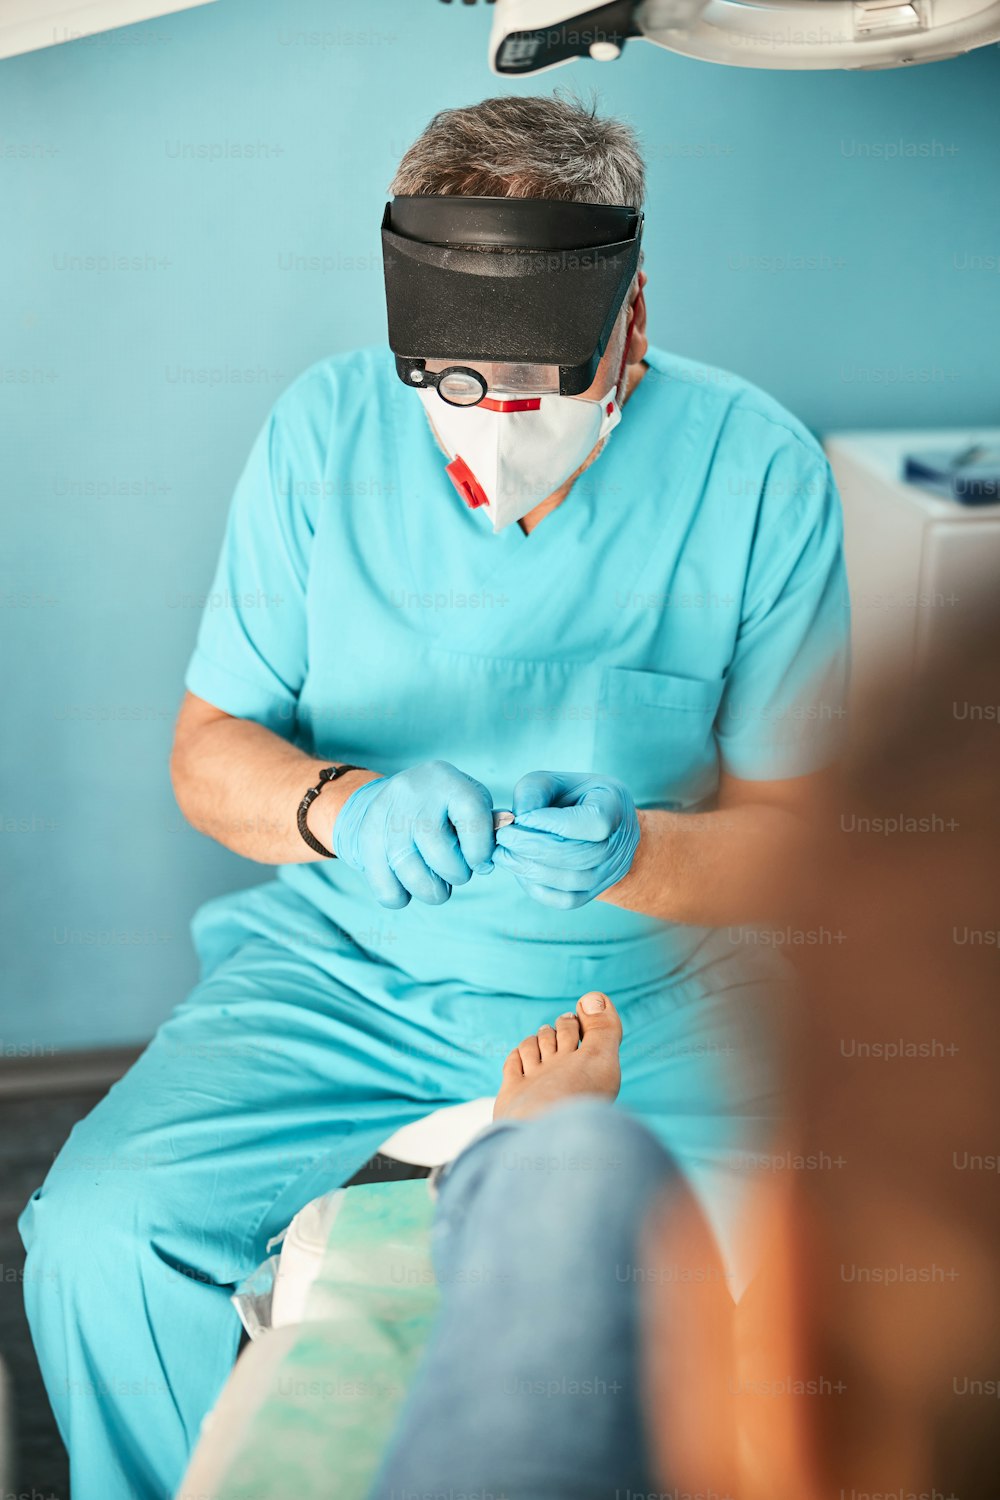 Concentrated podiatrist wearing uniform and mask on face while doing treating procedure